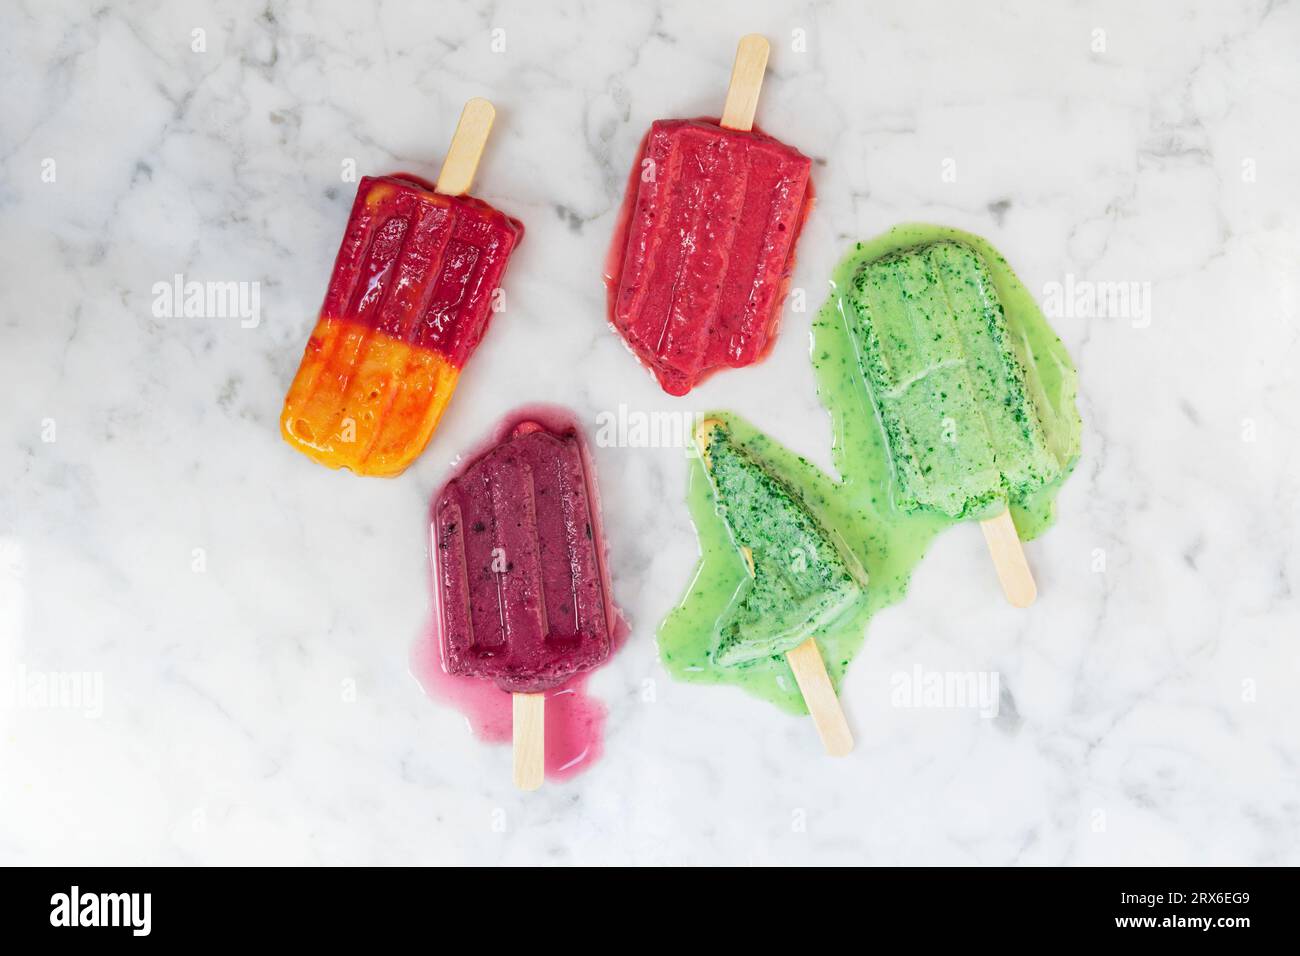 Homemade berry fruit popsicles melting against marble surface Stock Photo